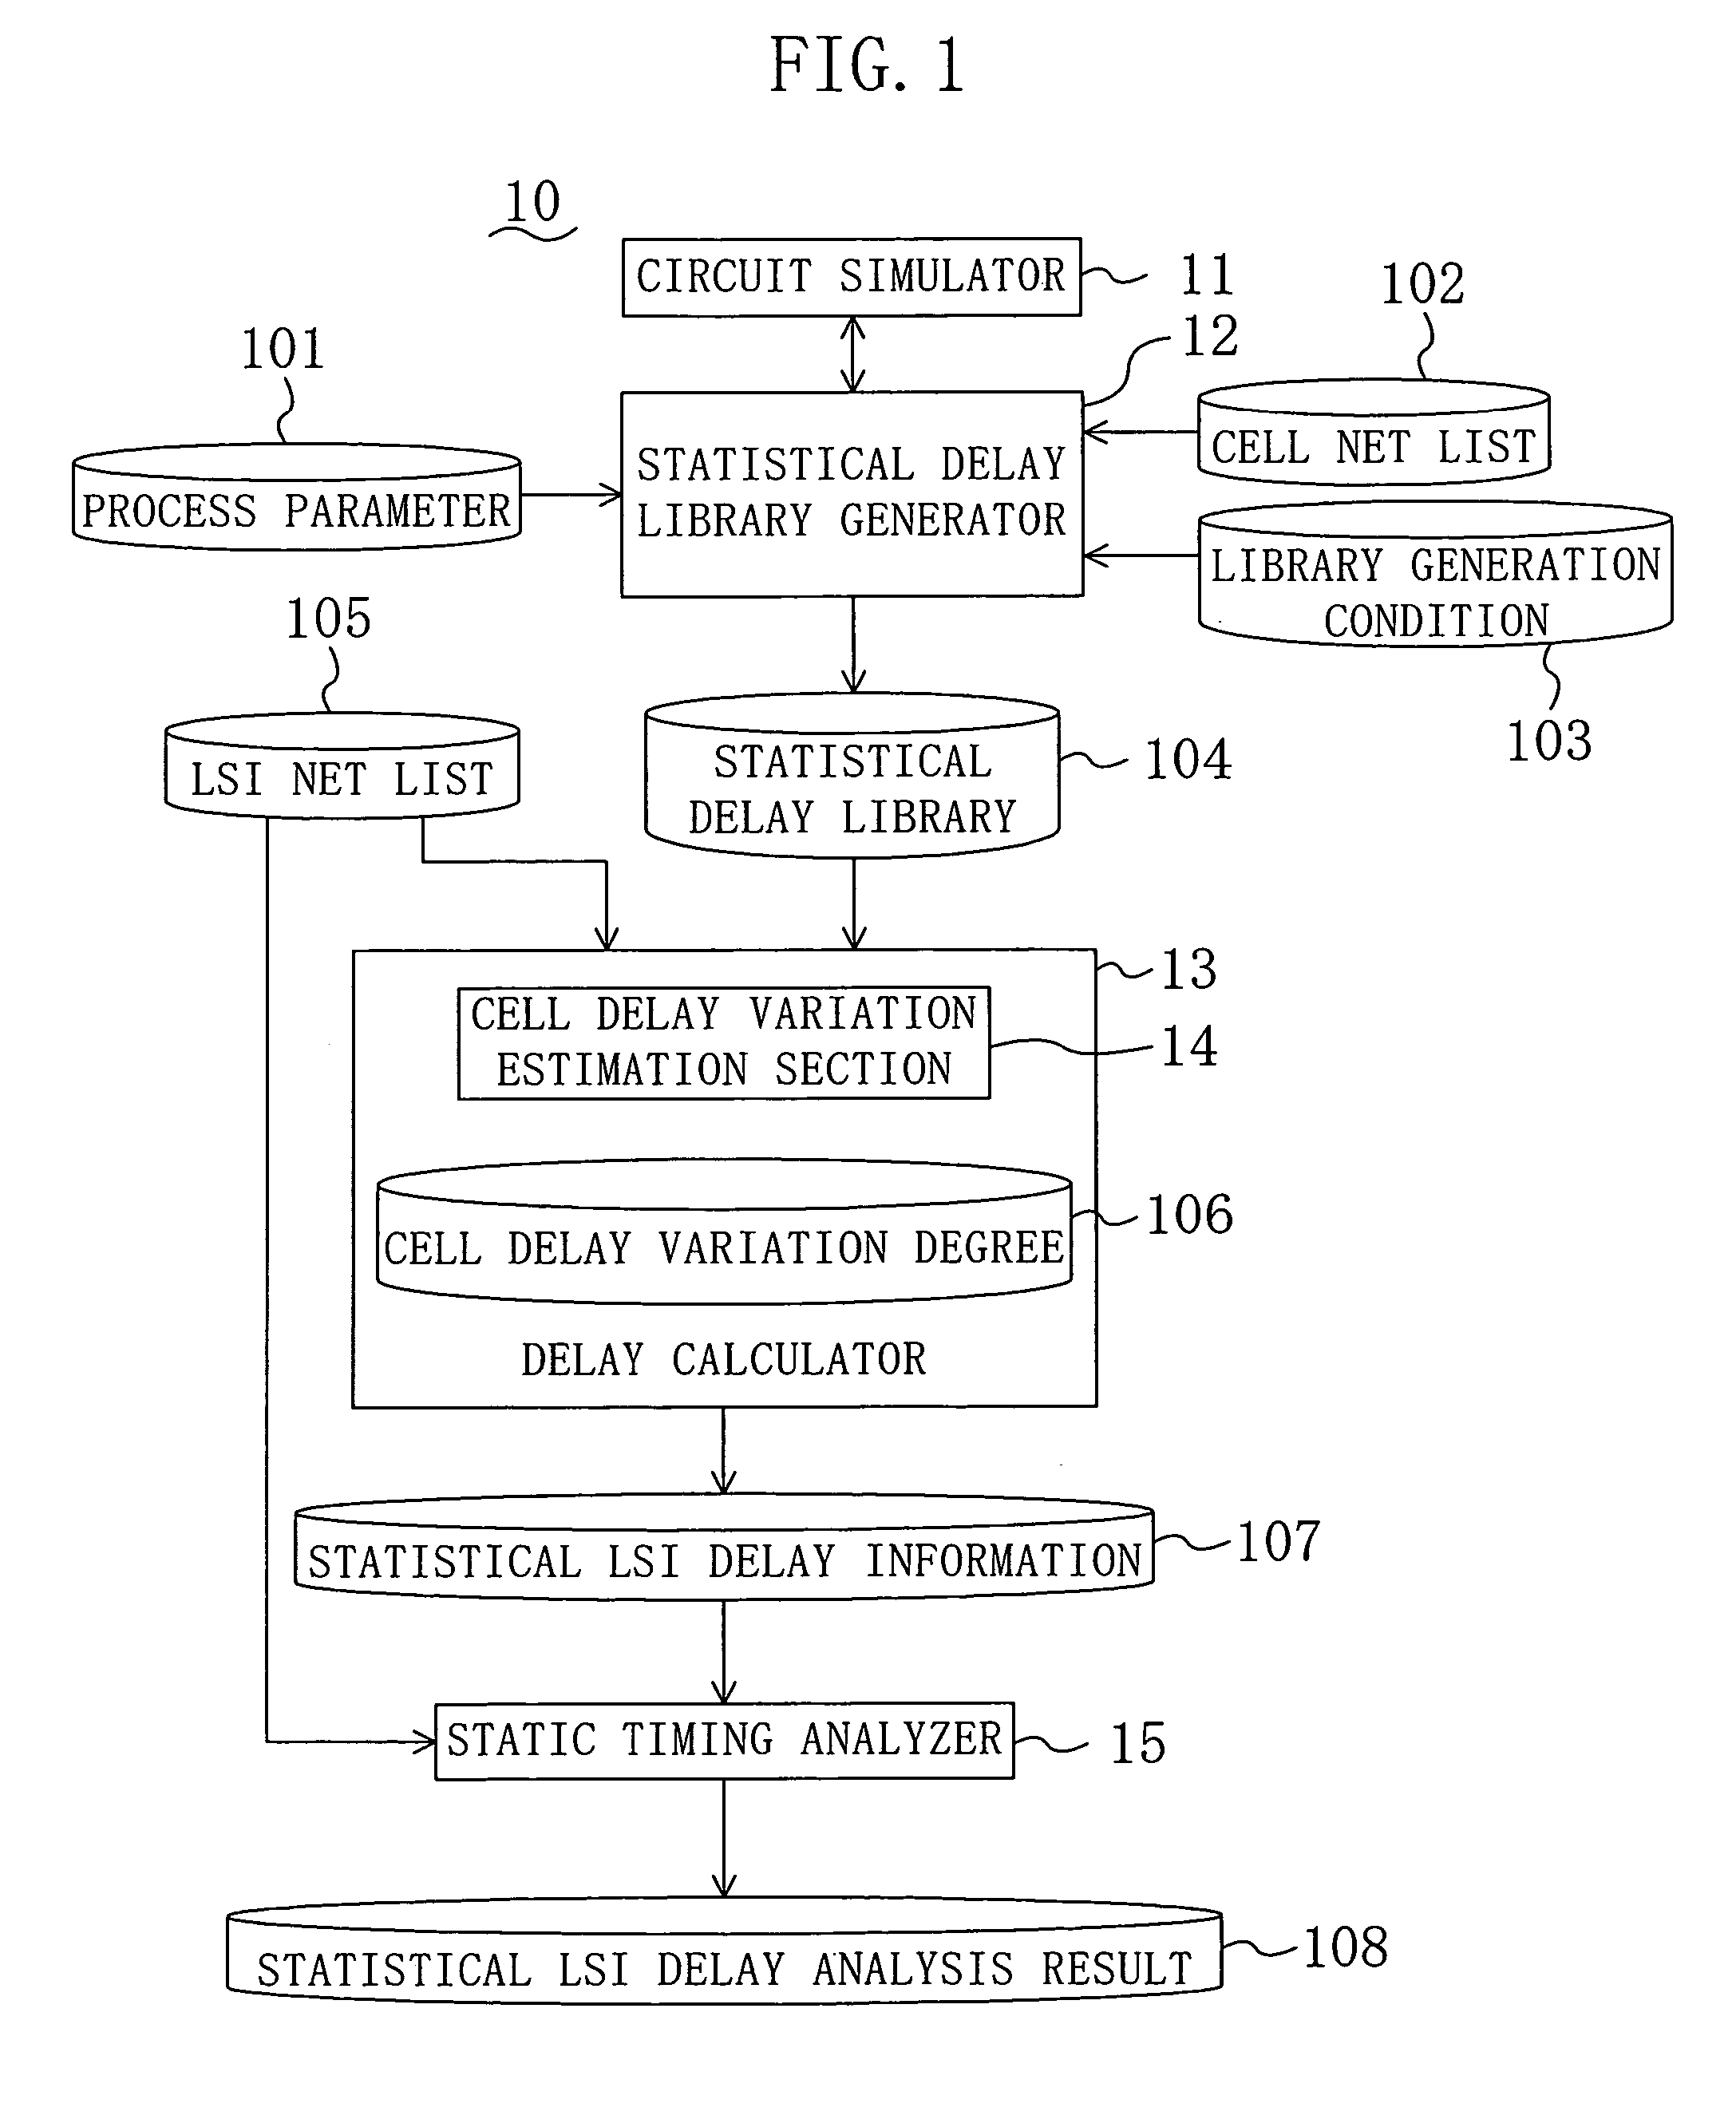 Apparatus for statistical LSI delay simulation